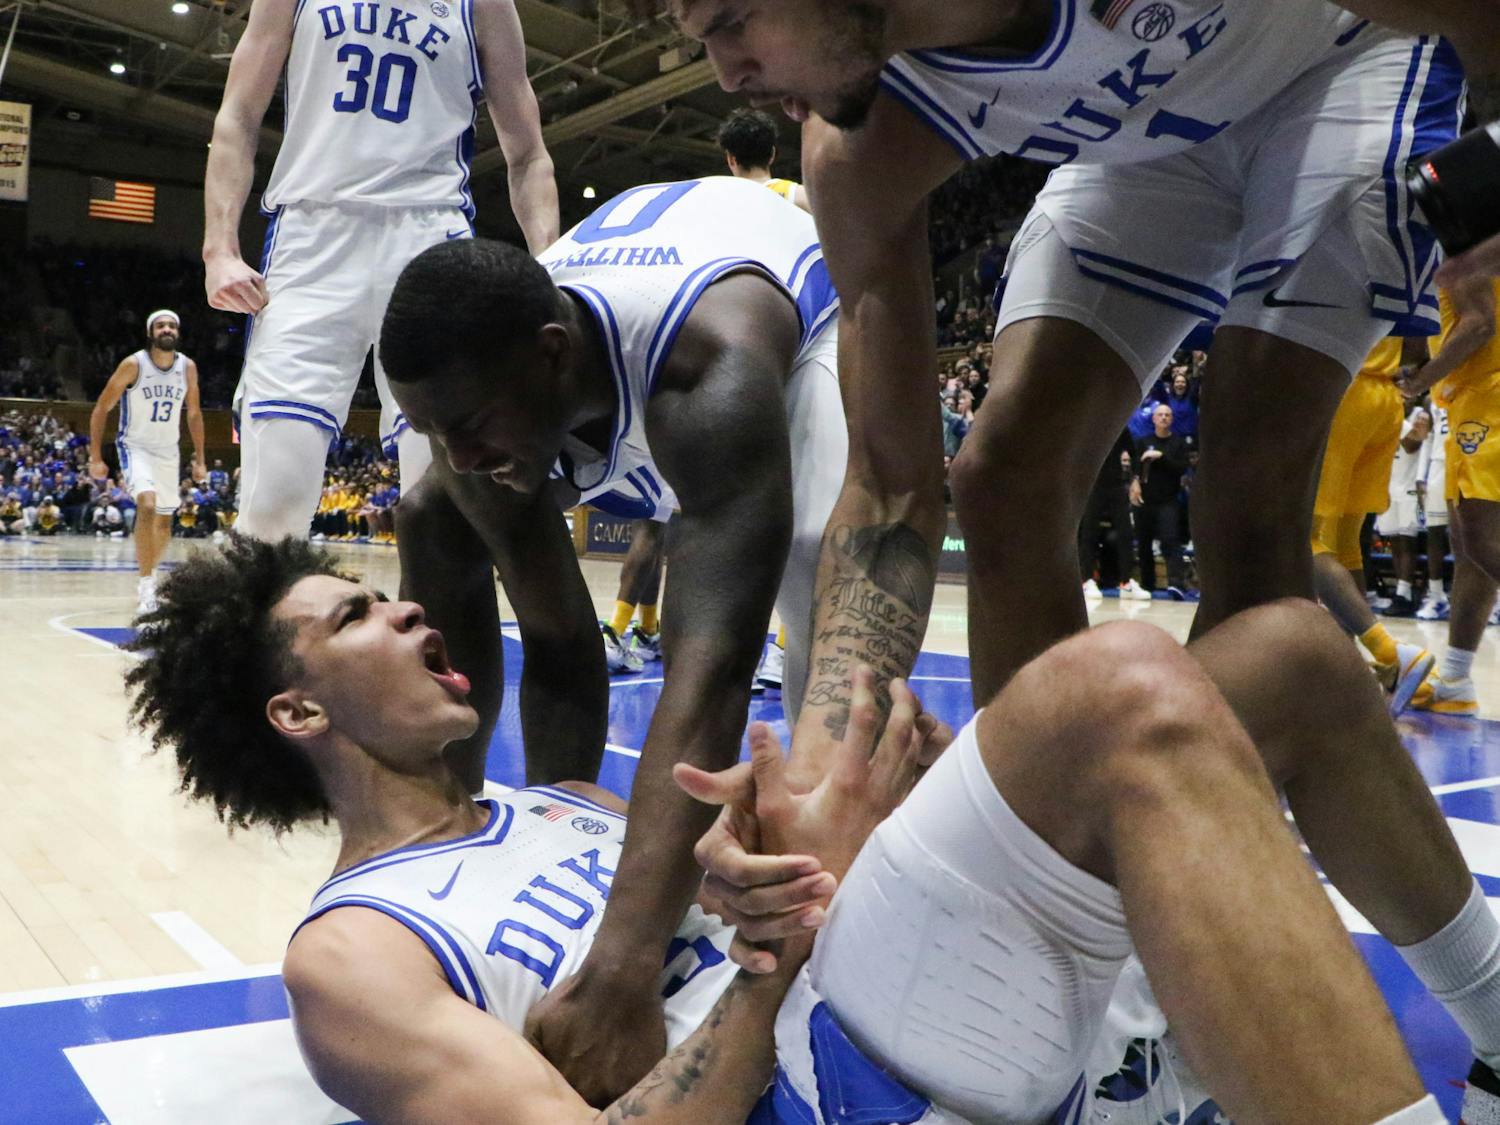 Duke players rejoice with Tyrese Proctor after a bucket during the 15-0 second-half run that changed the game for good.